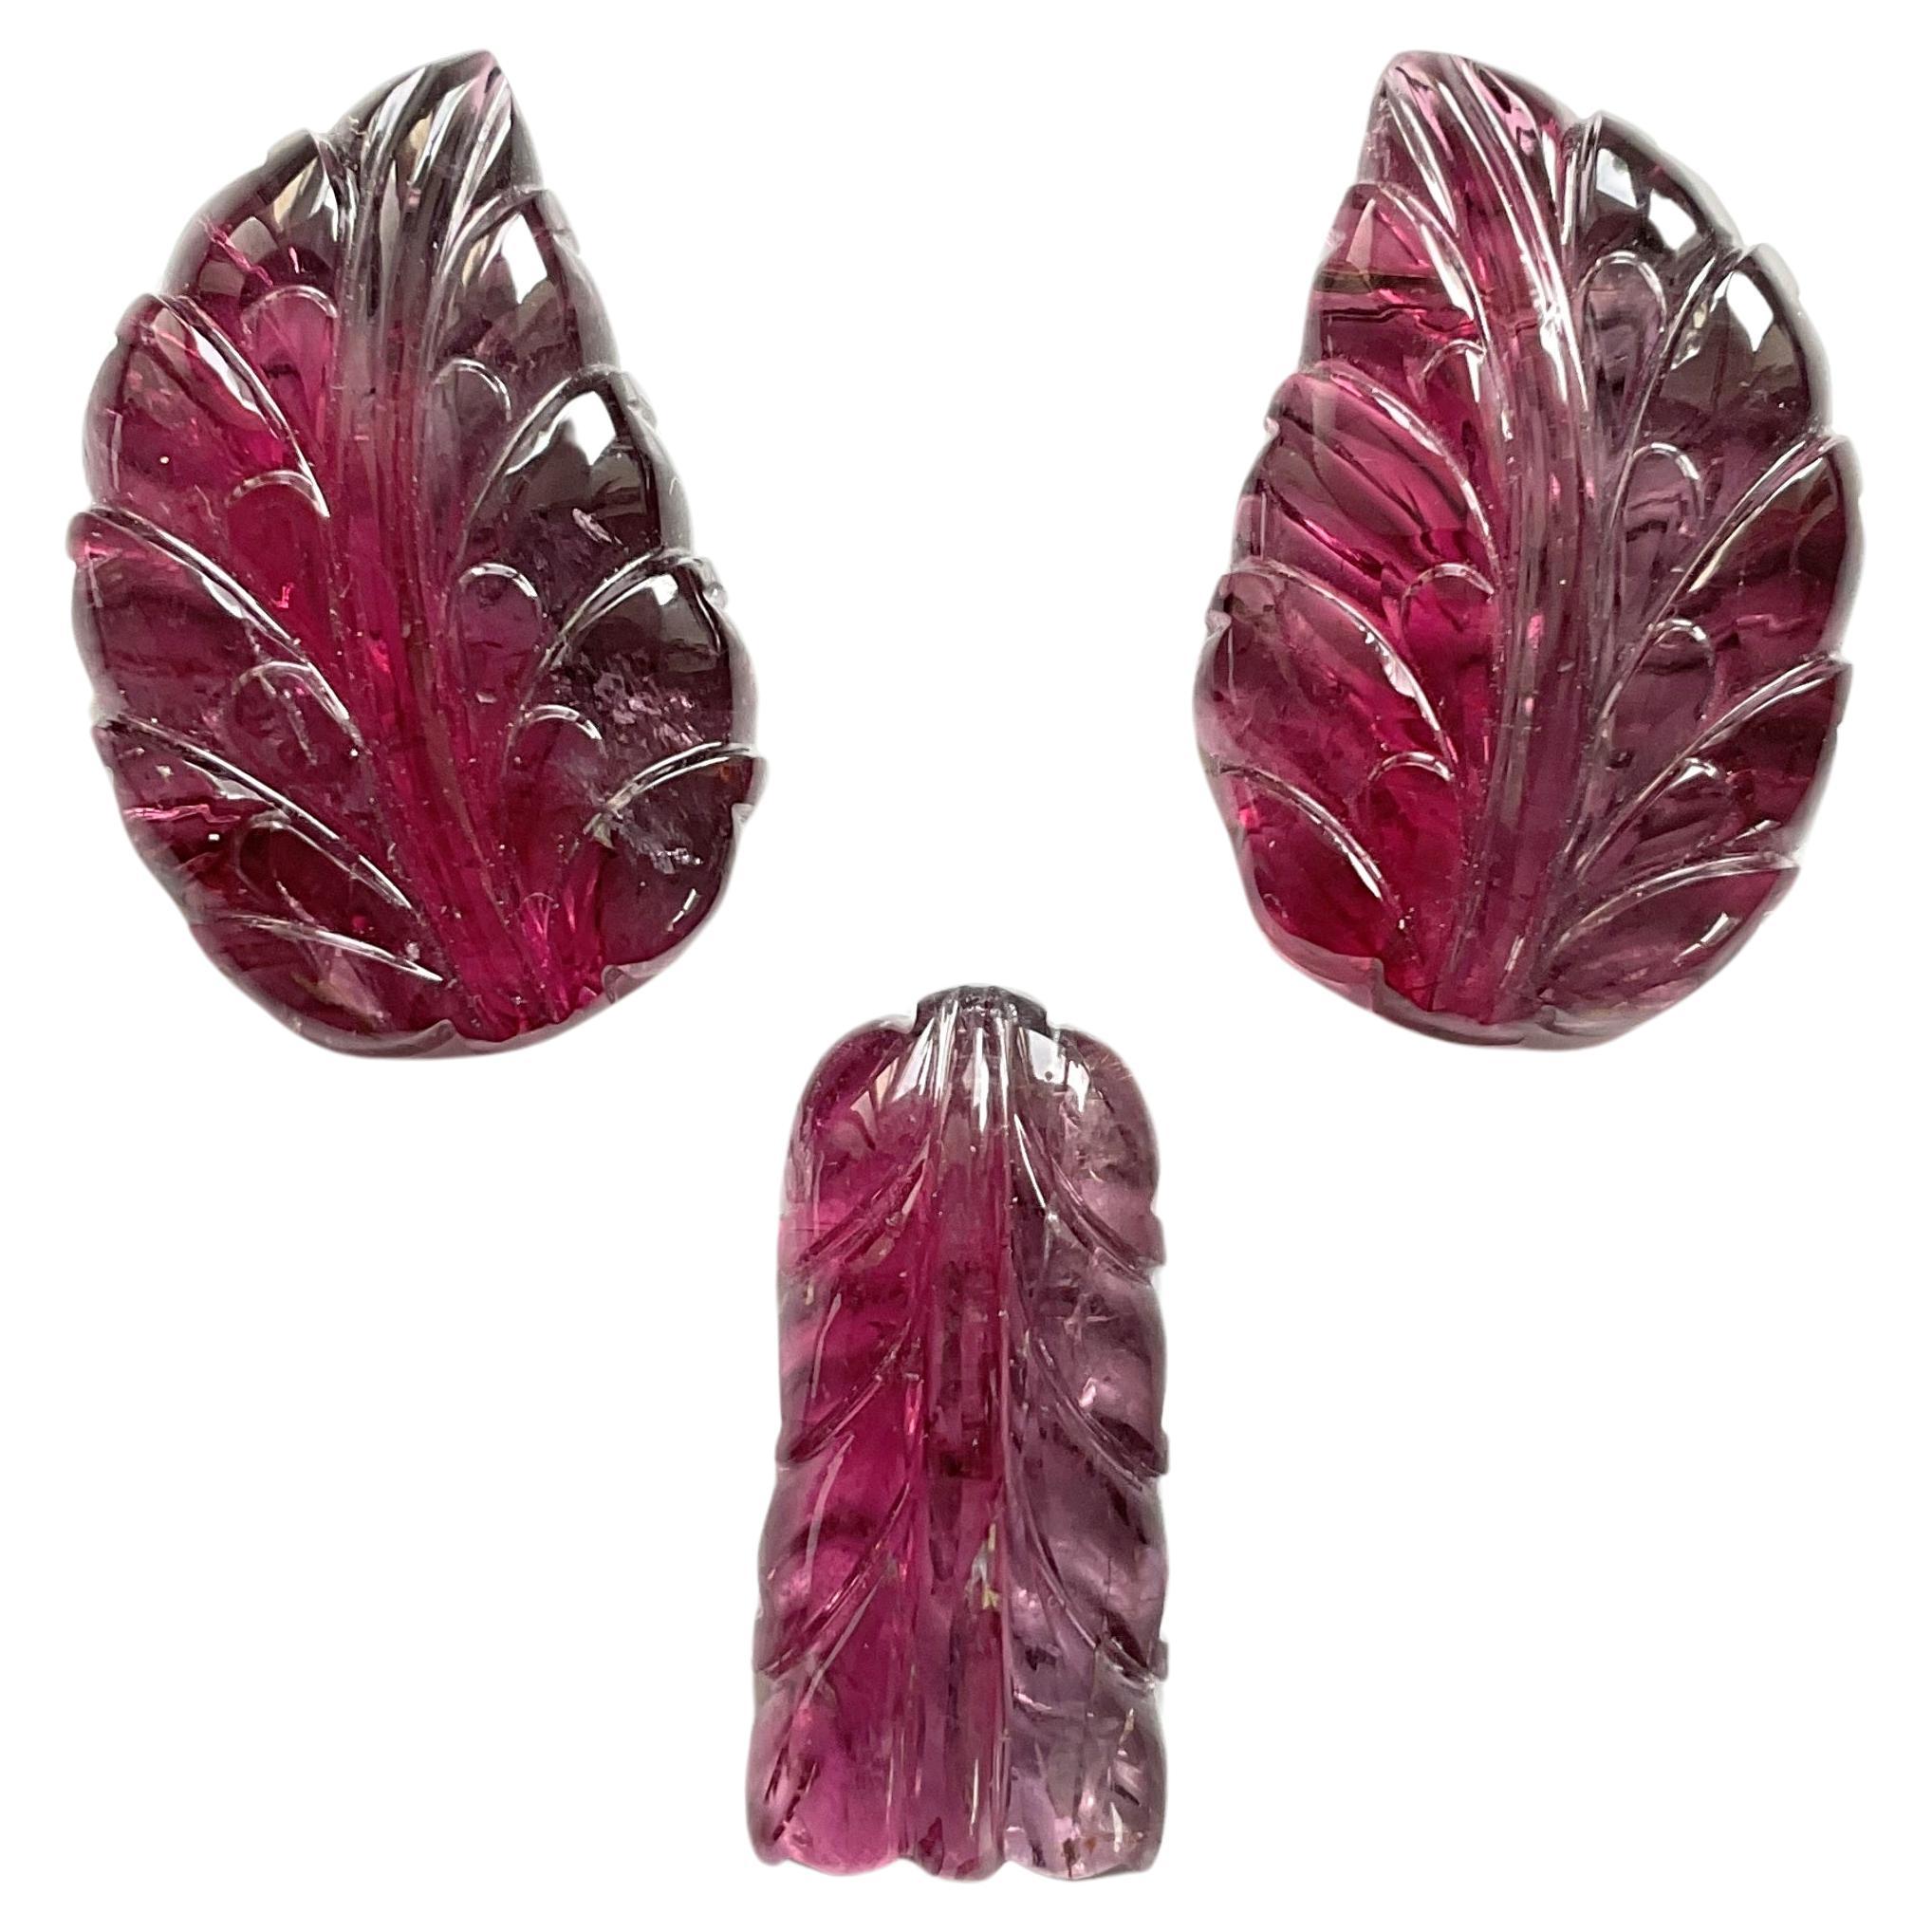 84.37 Carats Rubellite Tourmaline Carved Leaf 3 Pieces Fine jewelry Natural Gem For Sale